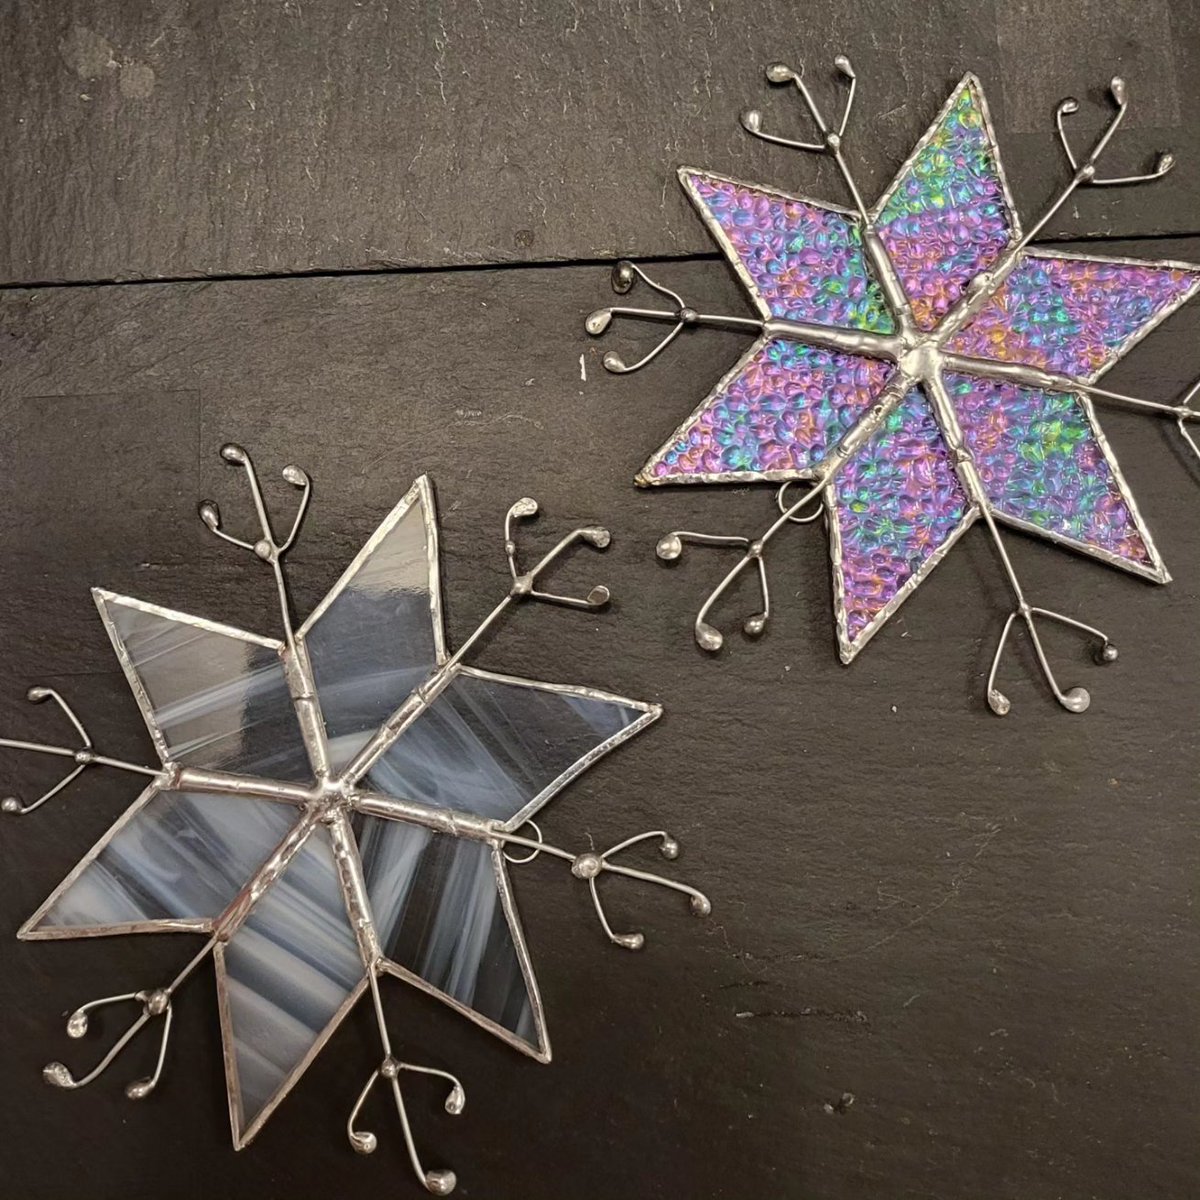 Some snowflakes ready for the Christmas Market at Sprowston 11th Nov 11:00 til 15:00 Cannerby Lane NR7 8NE.  Loads of craft stalls, pop over and see us for pressie inspiration  #madeinnorfolk #madebyme #stainedglass #snowflakes #Christmasgifts